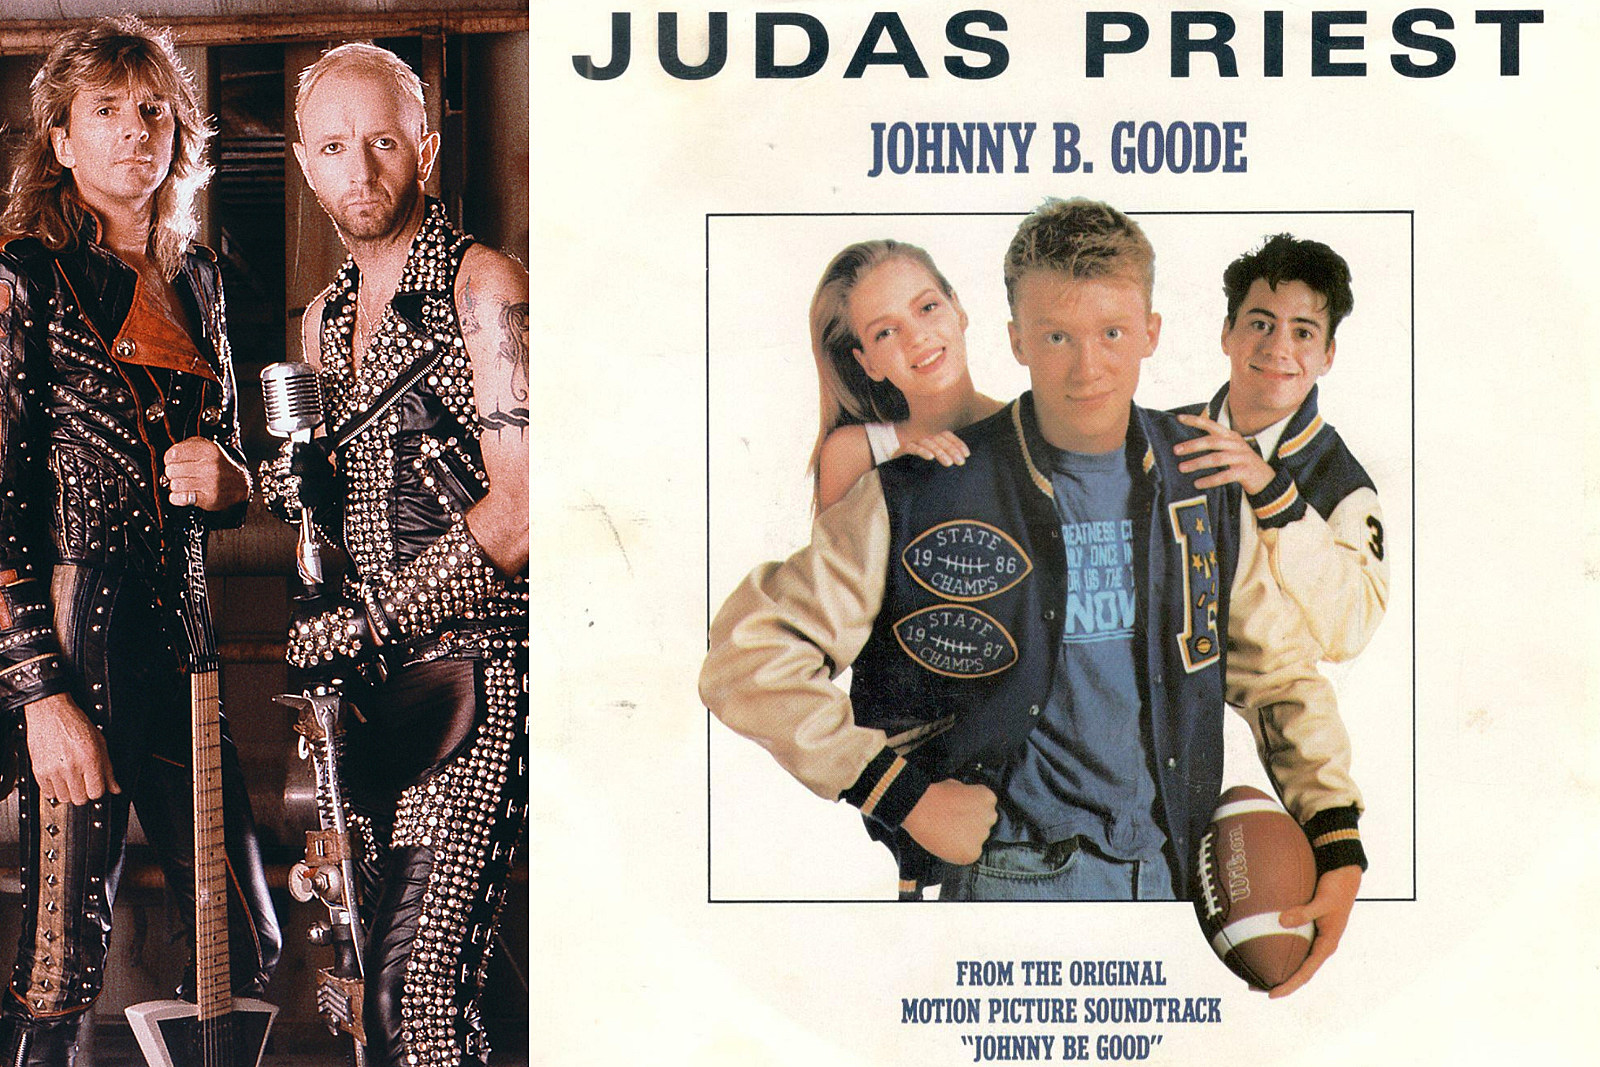 35 Years Ago: Judas Priest Fumbles With ‘Johnny B. Goode’ Cover